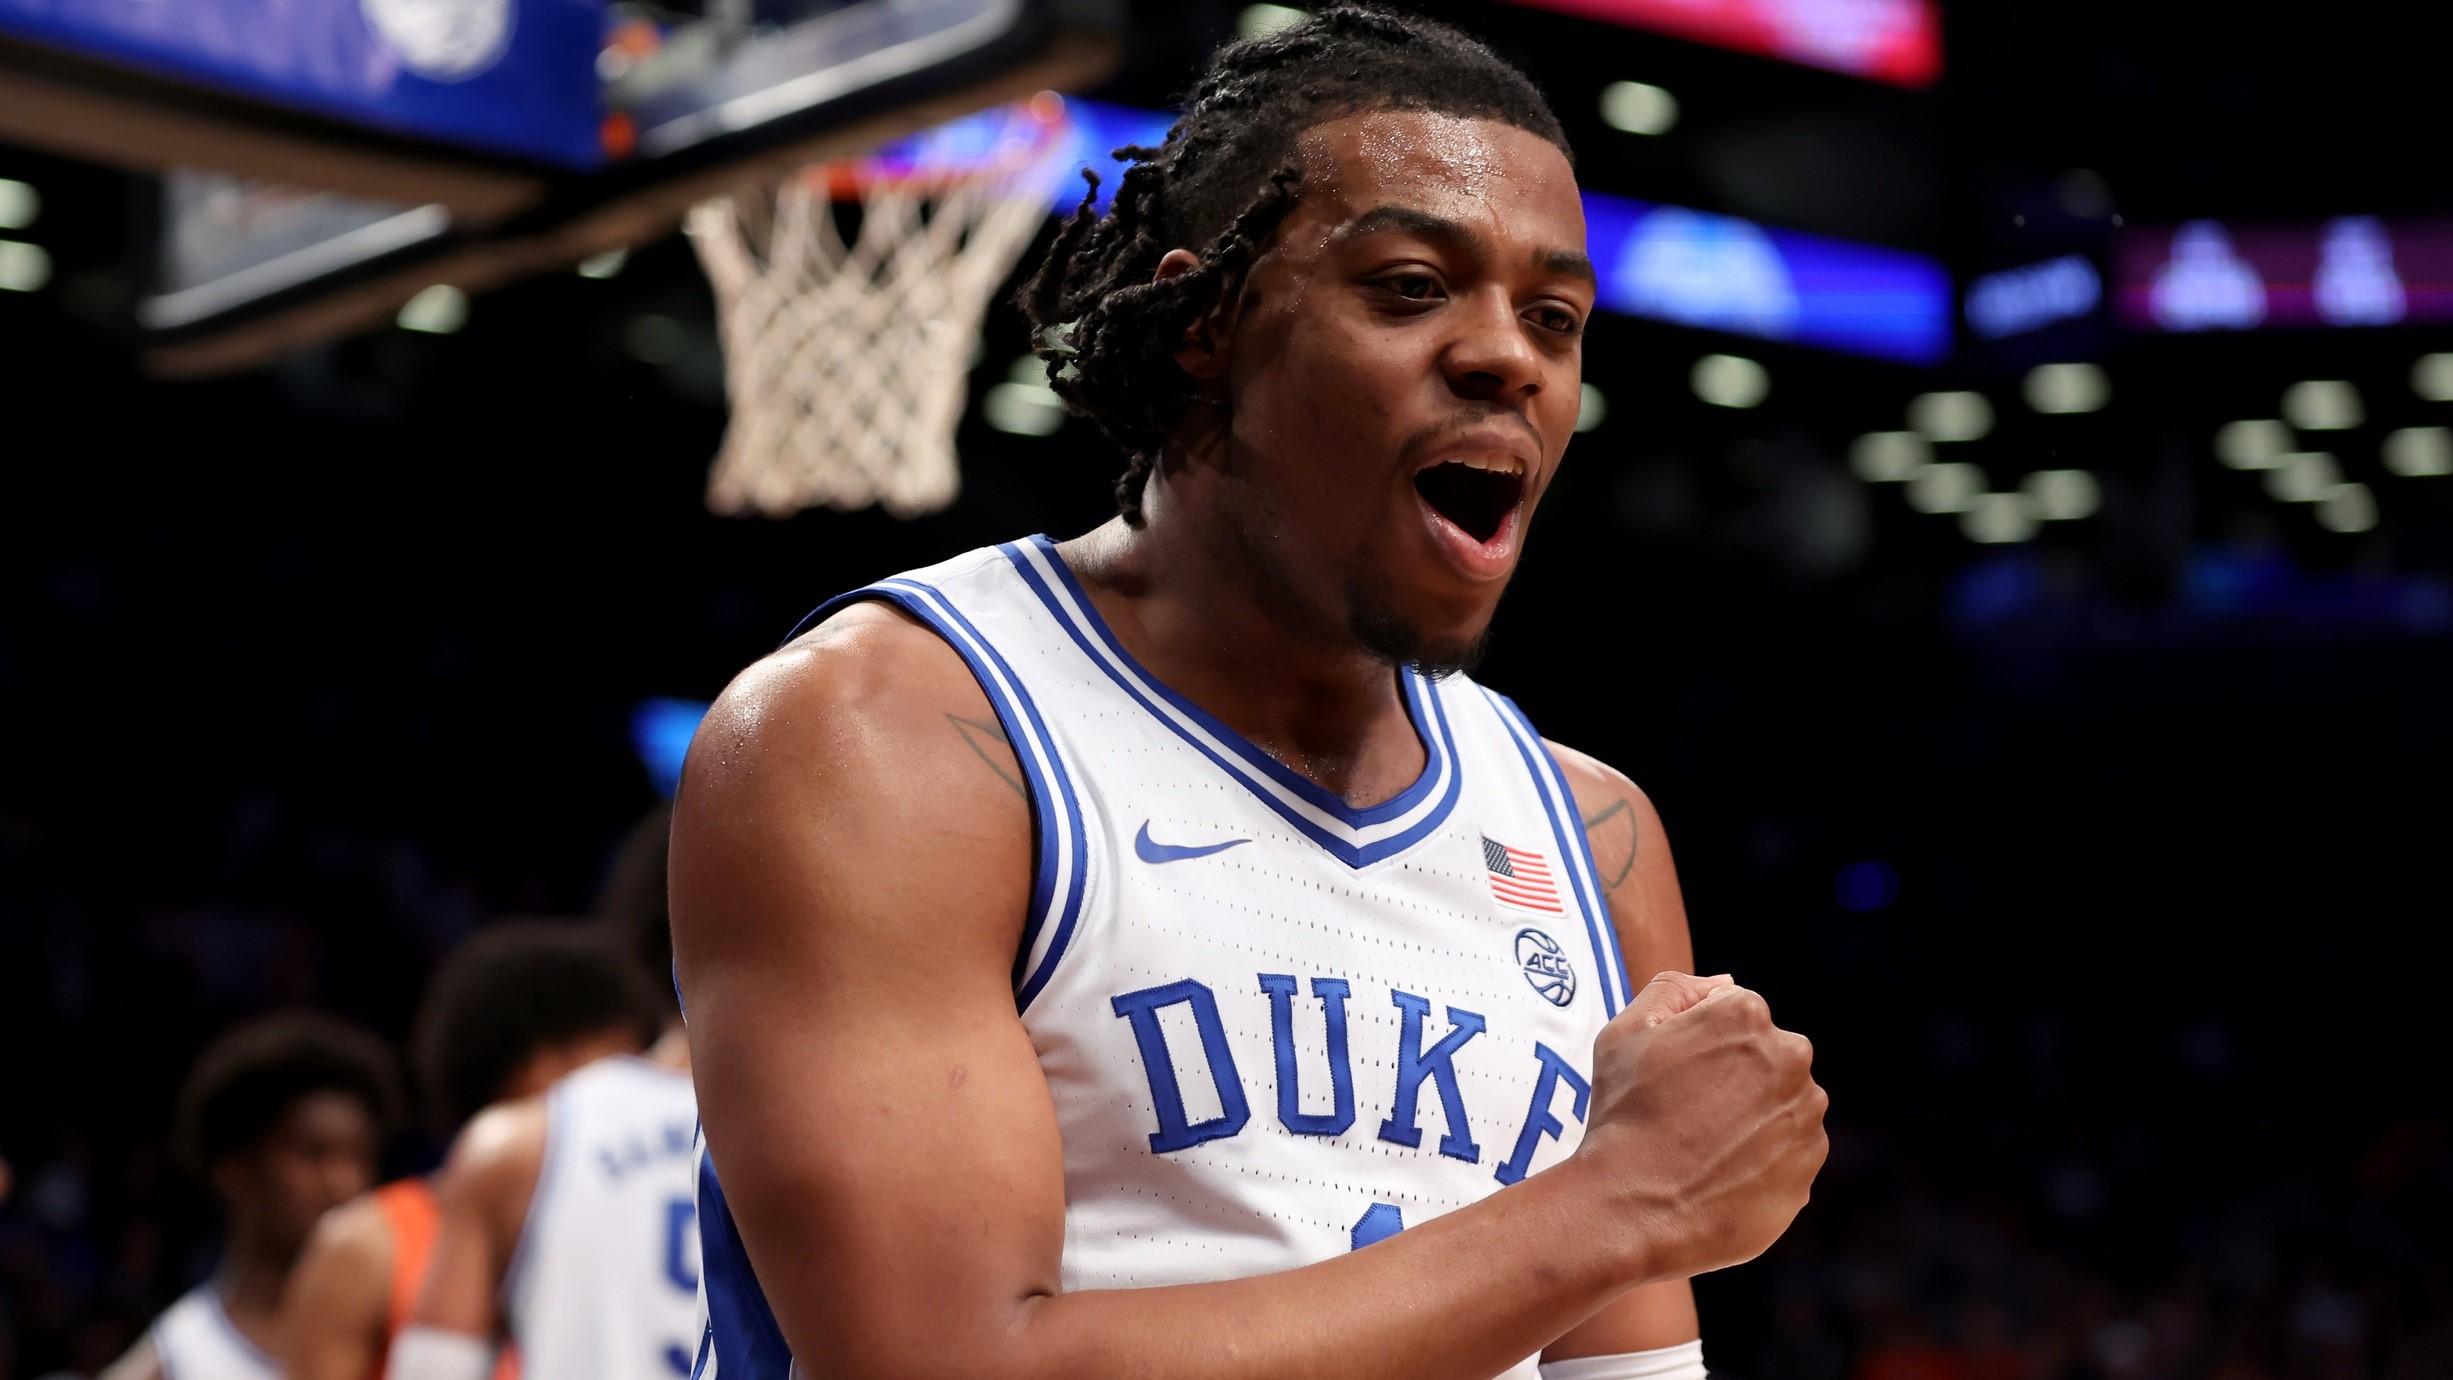 Mar 12, 2022; Brooklyn, NY, USA; Duke Blue Devils guard Trevor Keels (1) reacts during the second half of the ACC Men's Basketball Tournament final against the Virginia Tech Hokies at Barclays Center.